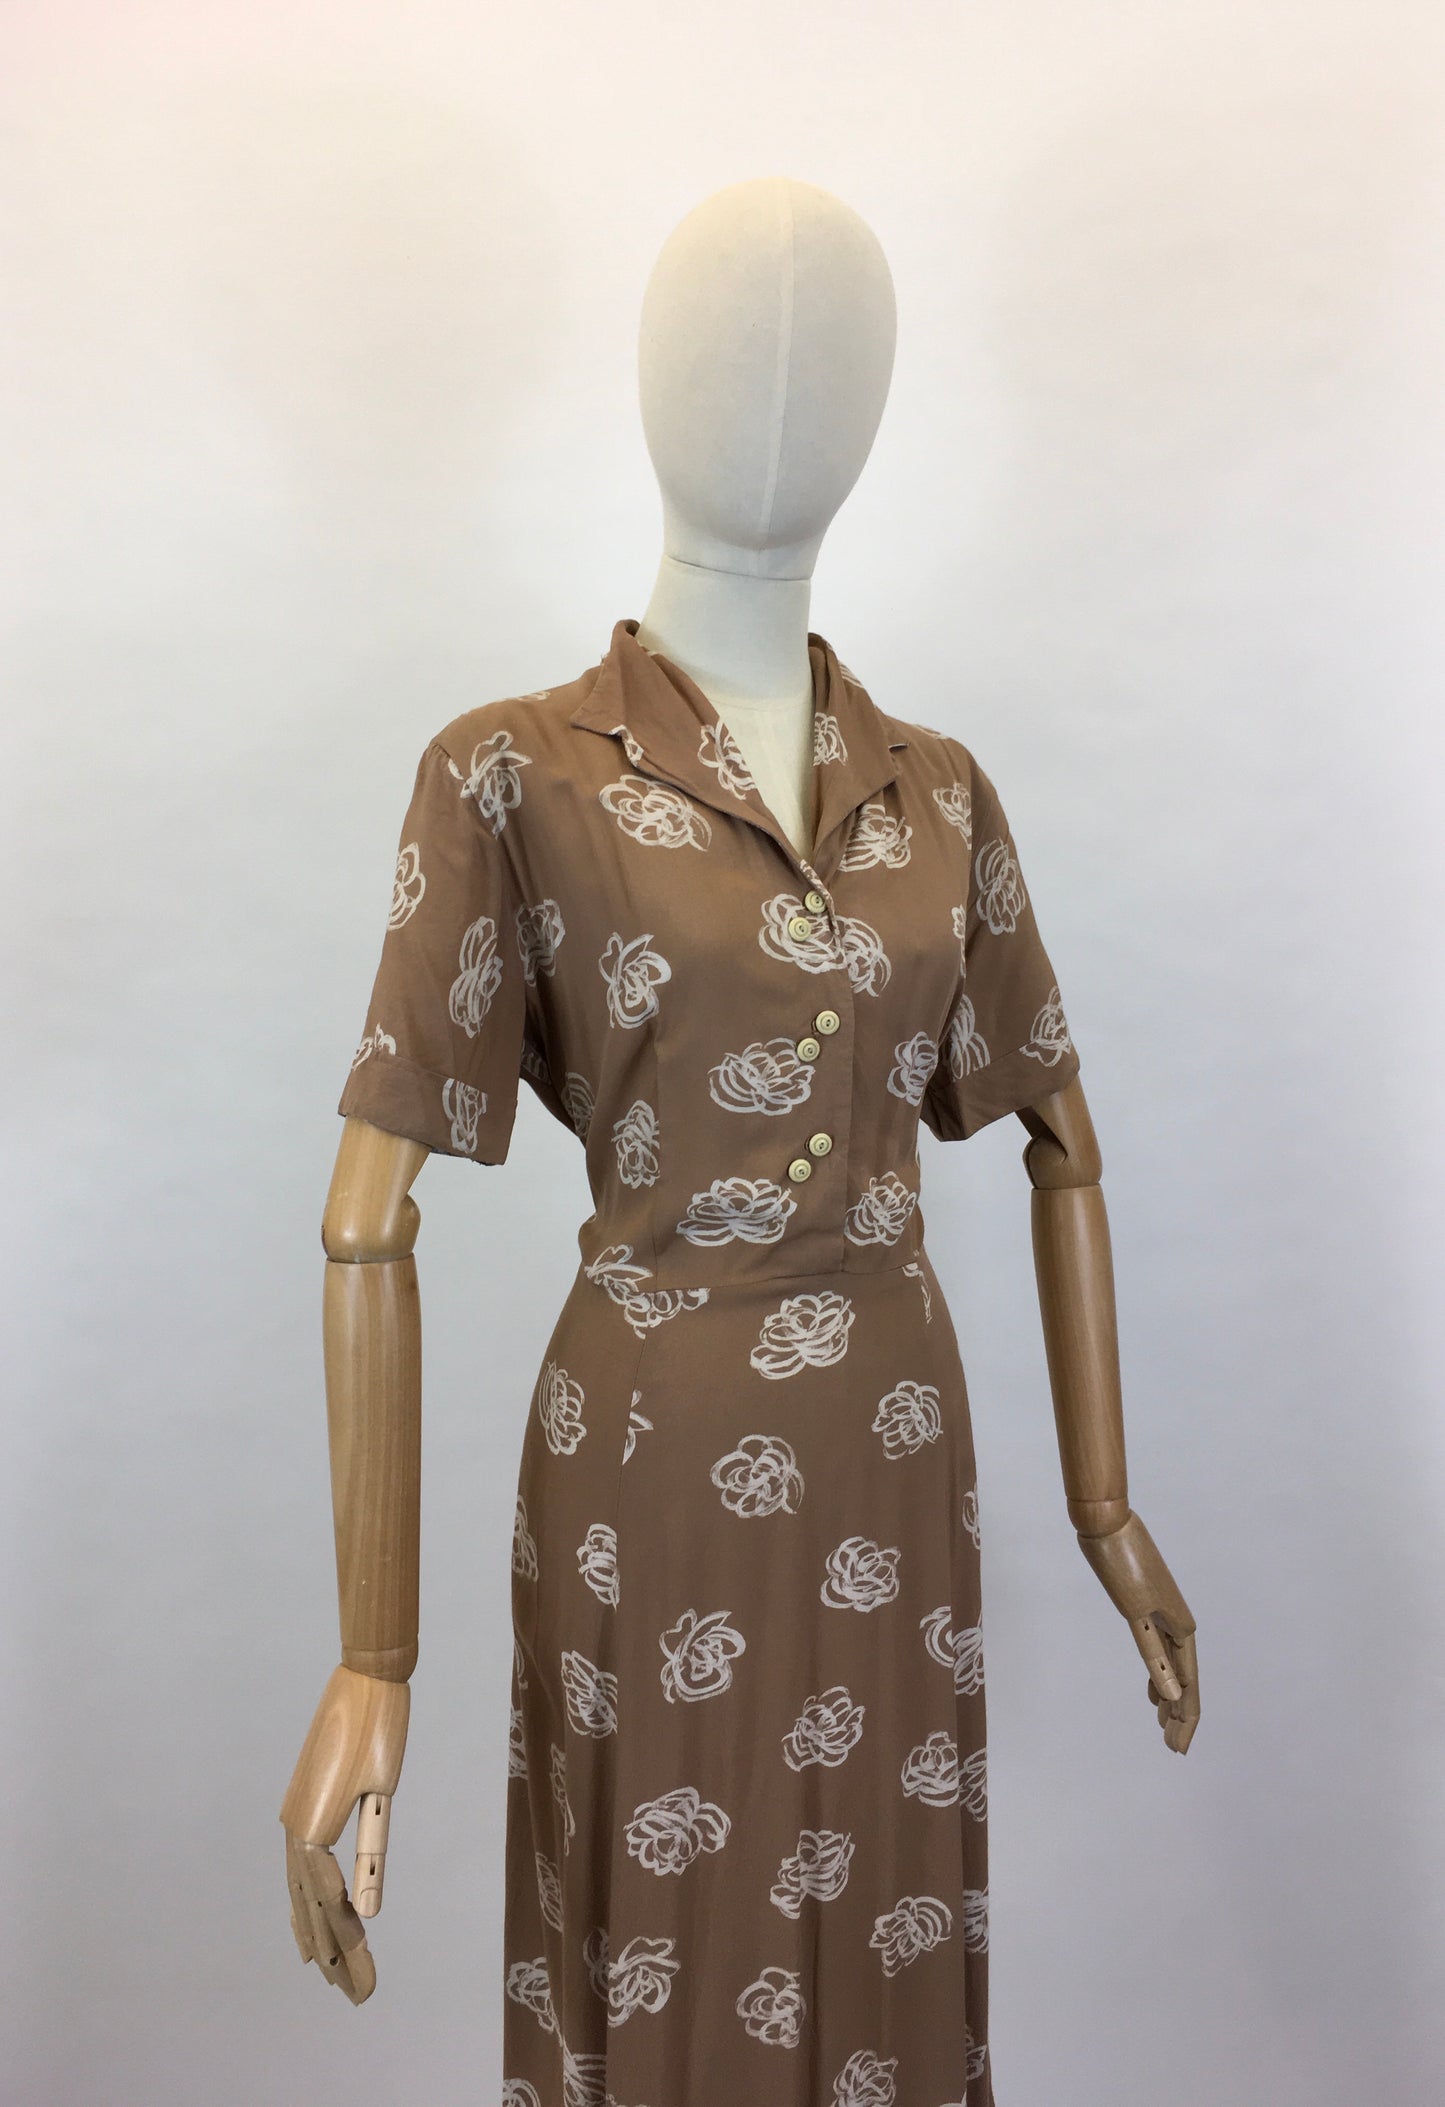 Original 1940’s VOLUP Day Dress - In A Brown & White Floral Swirl Print Cotton